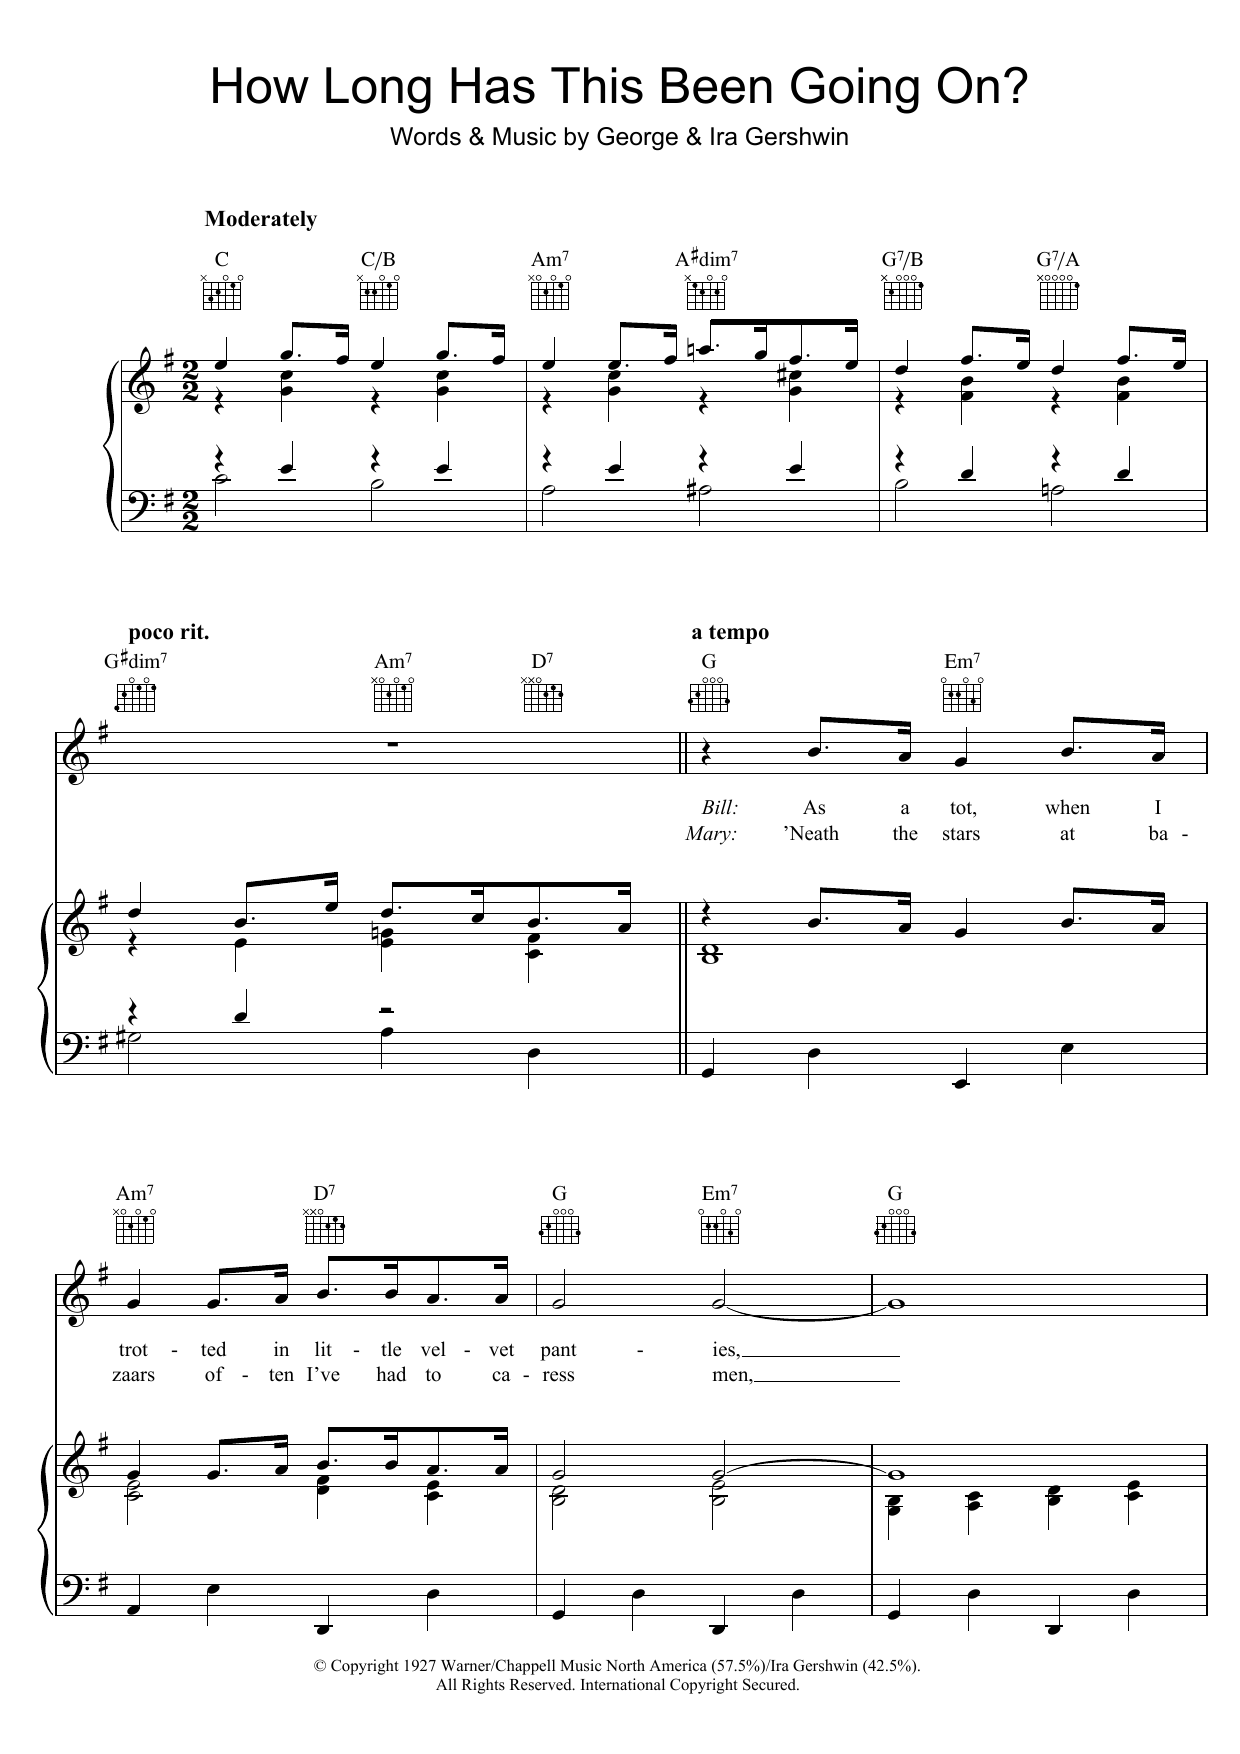 How Long Has This Been Going On? sheet music